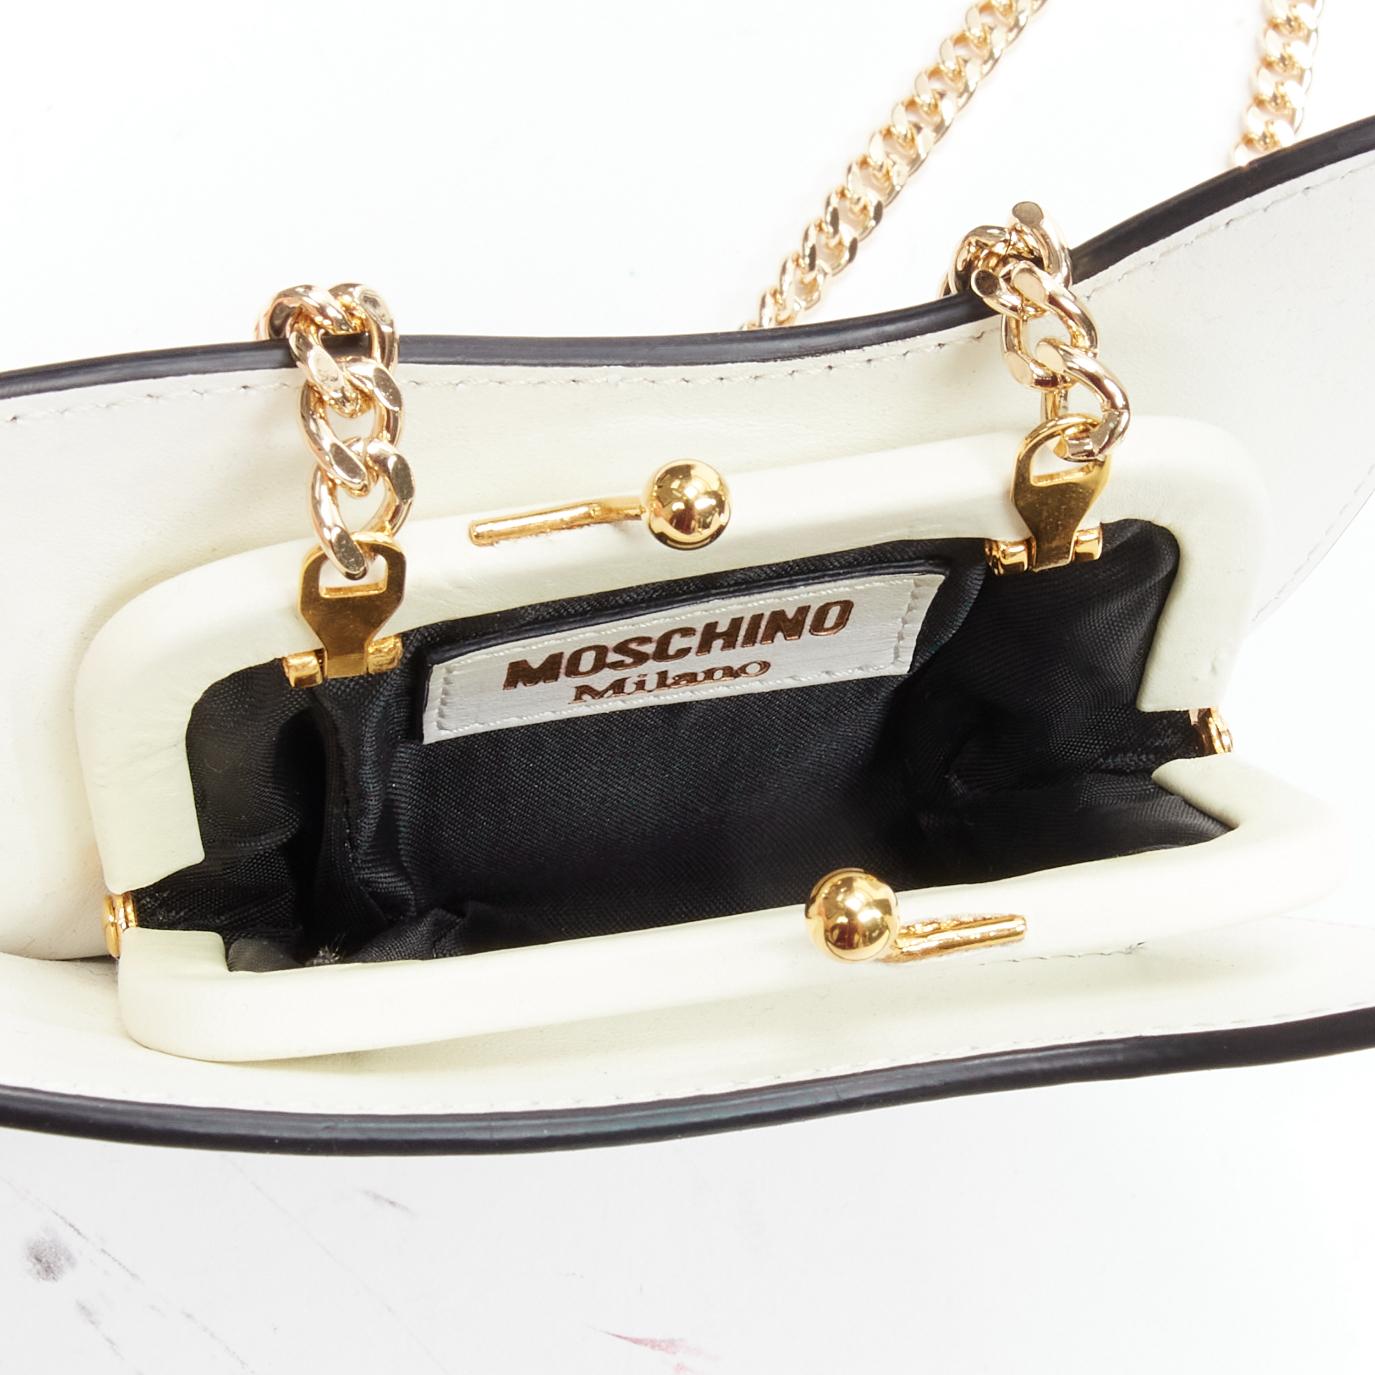 MOSCHINO COUTURE 2020 Runway Picasso Dove illustration leather crossbody bag 2